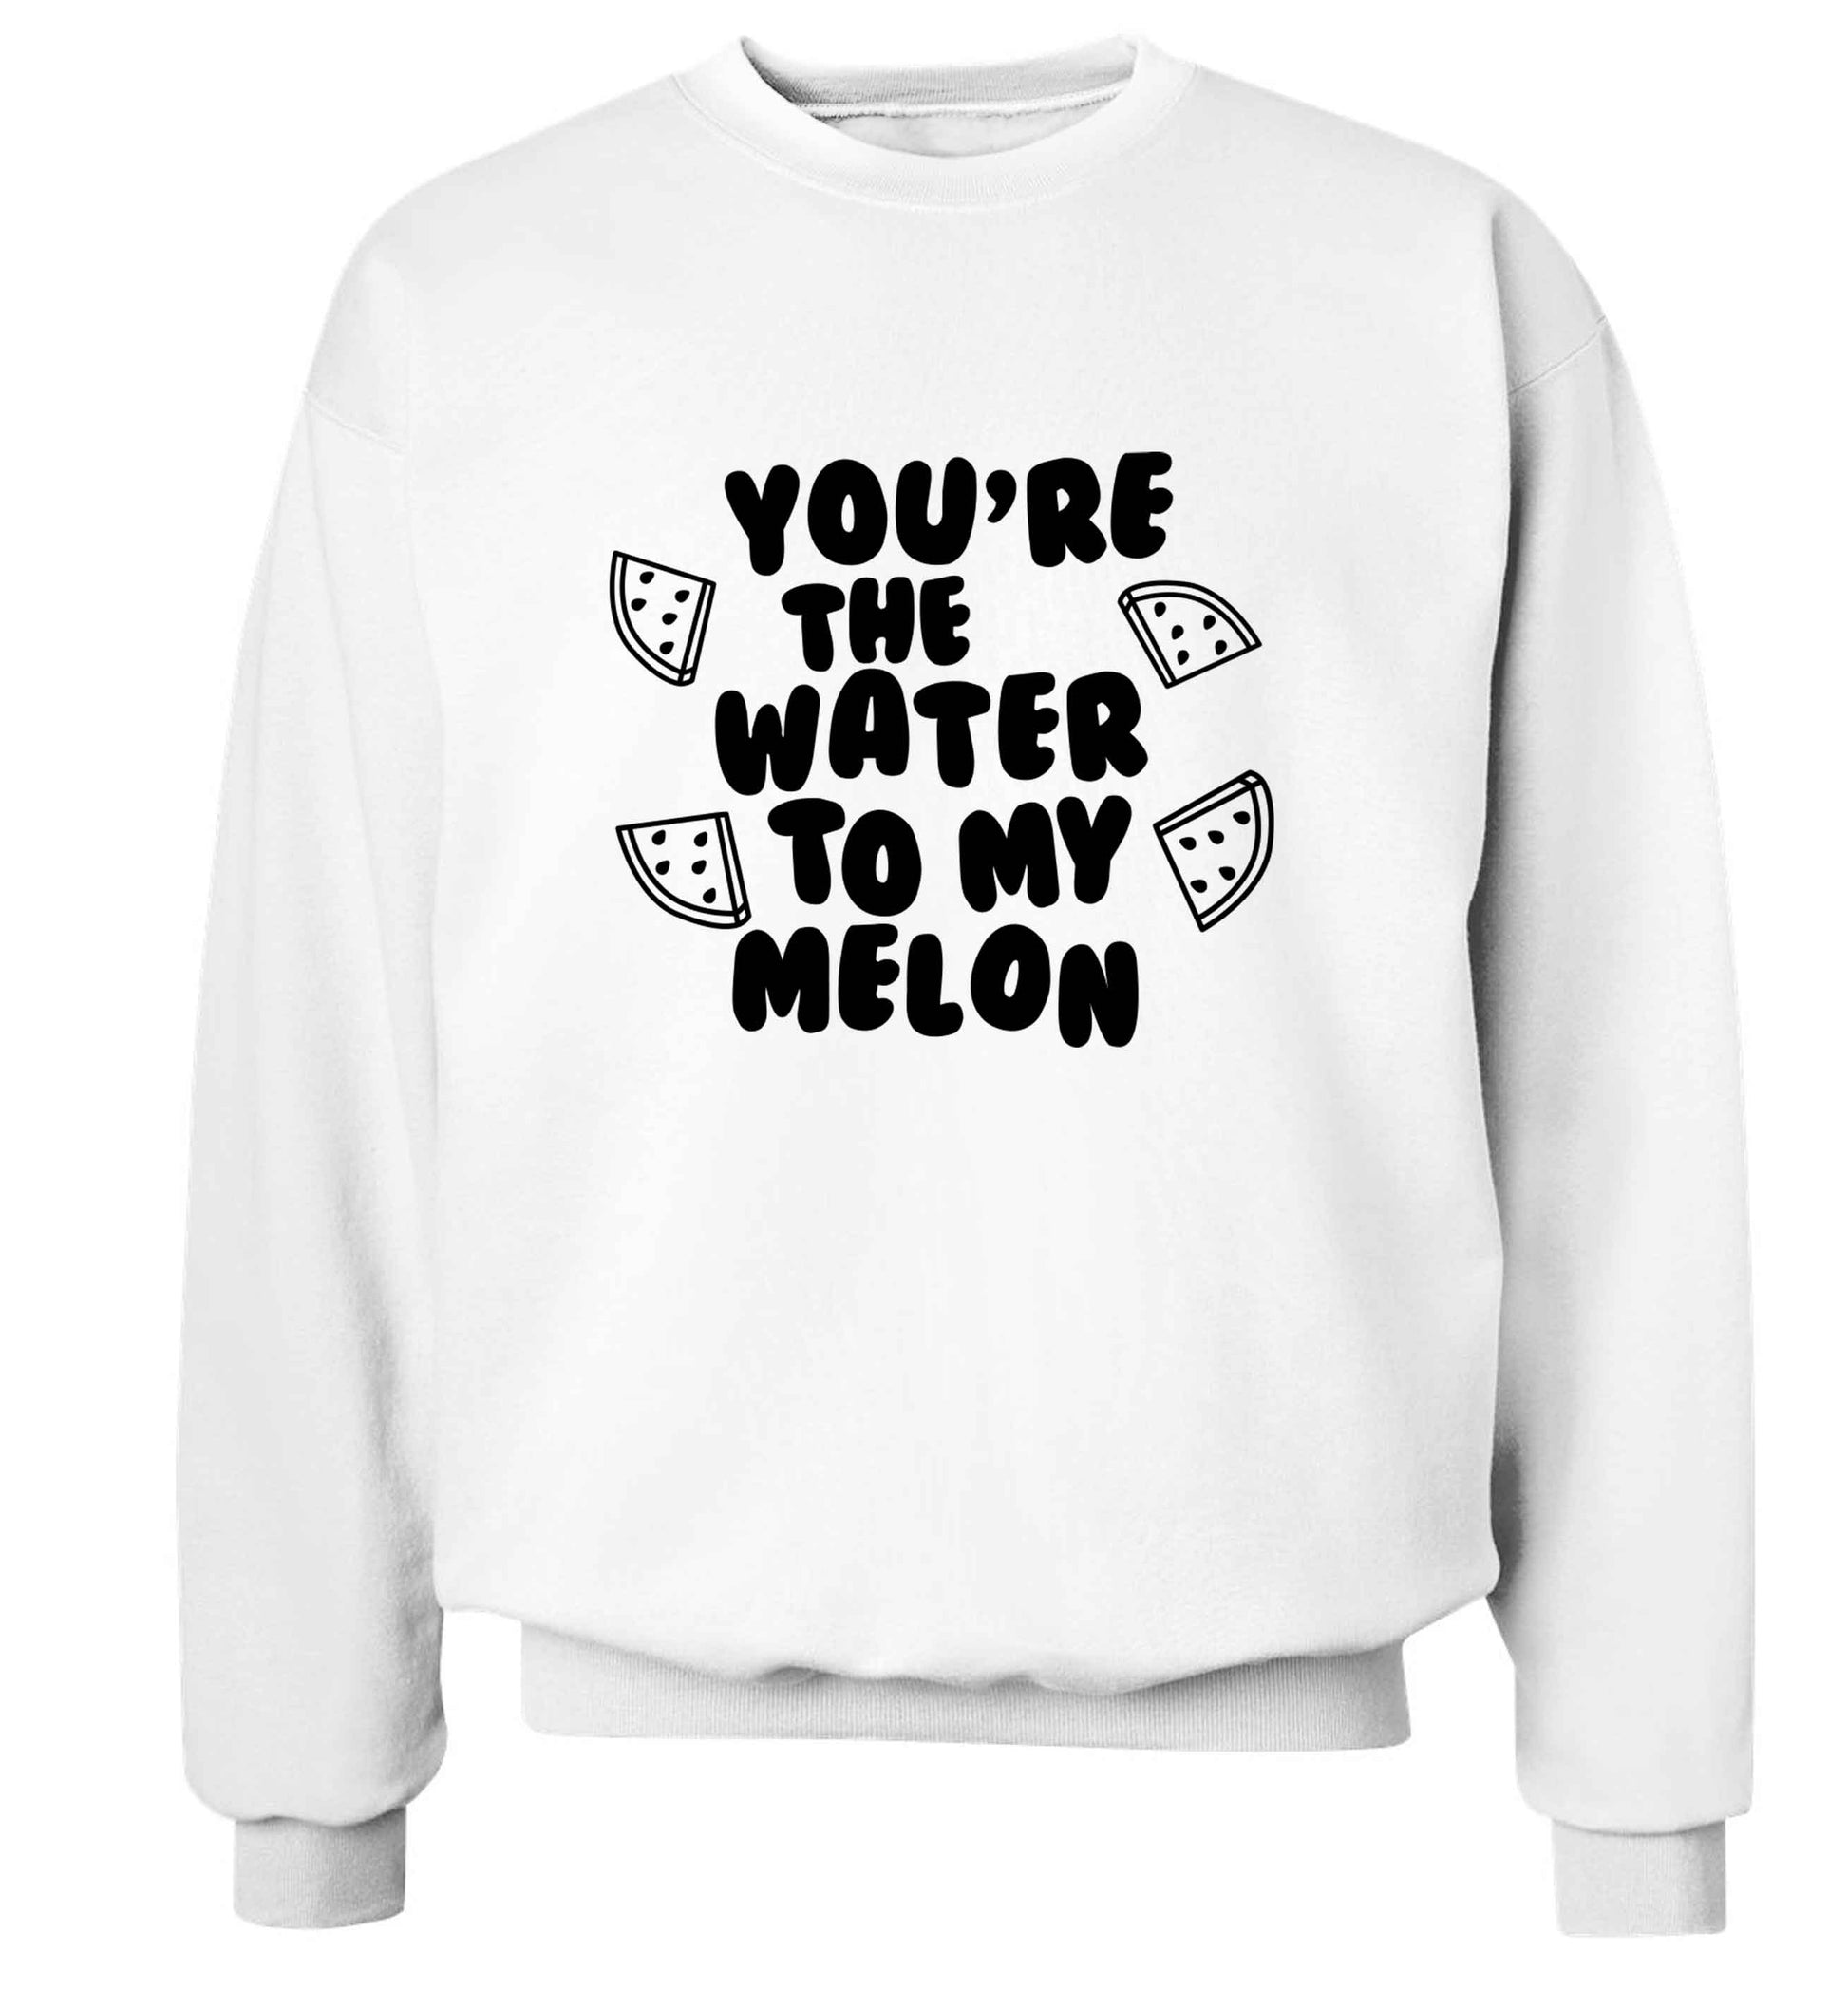 You're the water to my melon adult's unisex white sweater 2XL